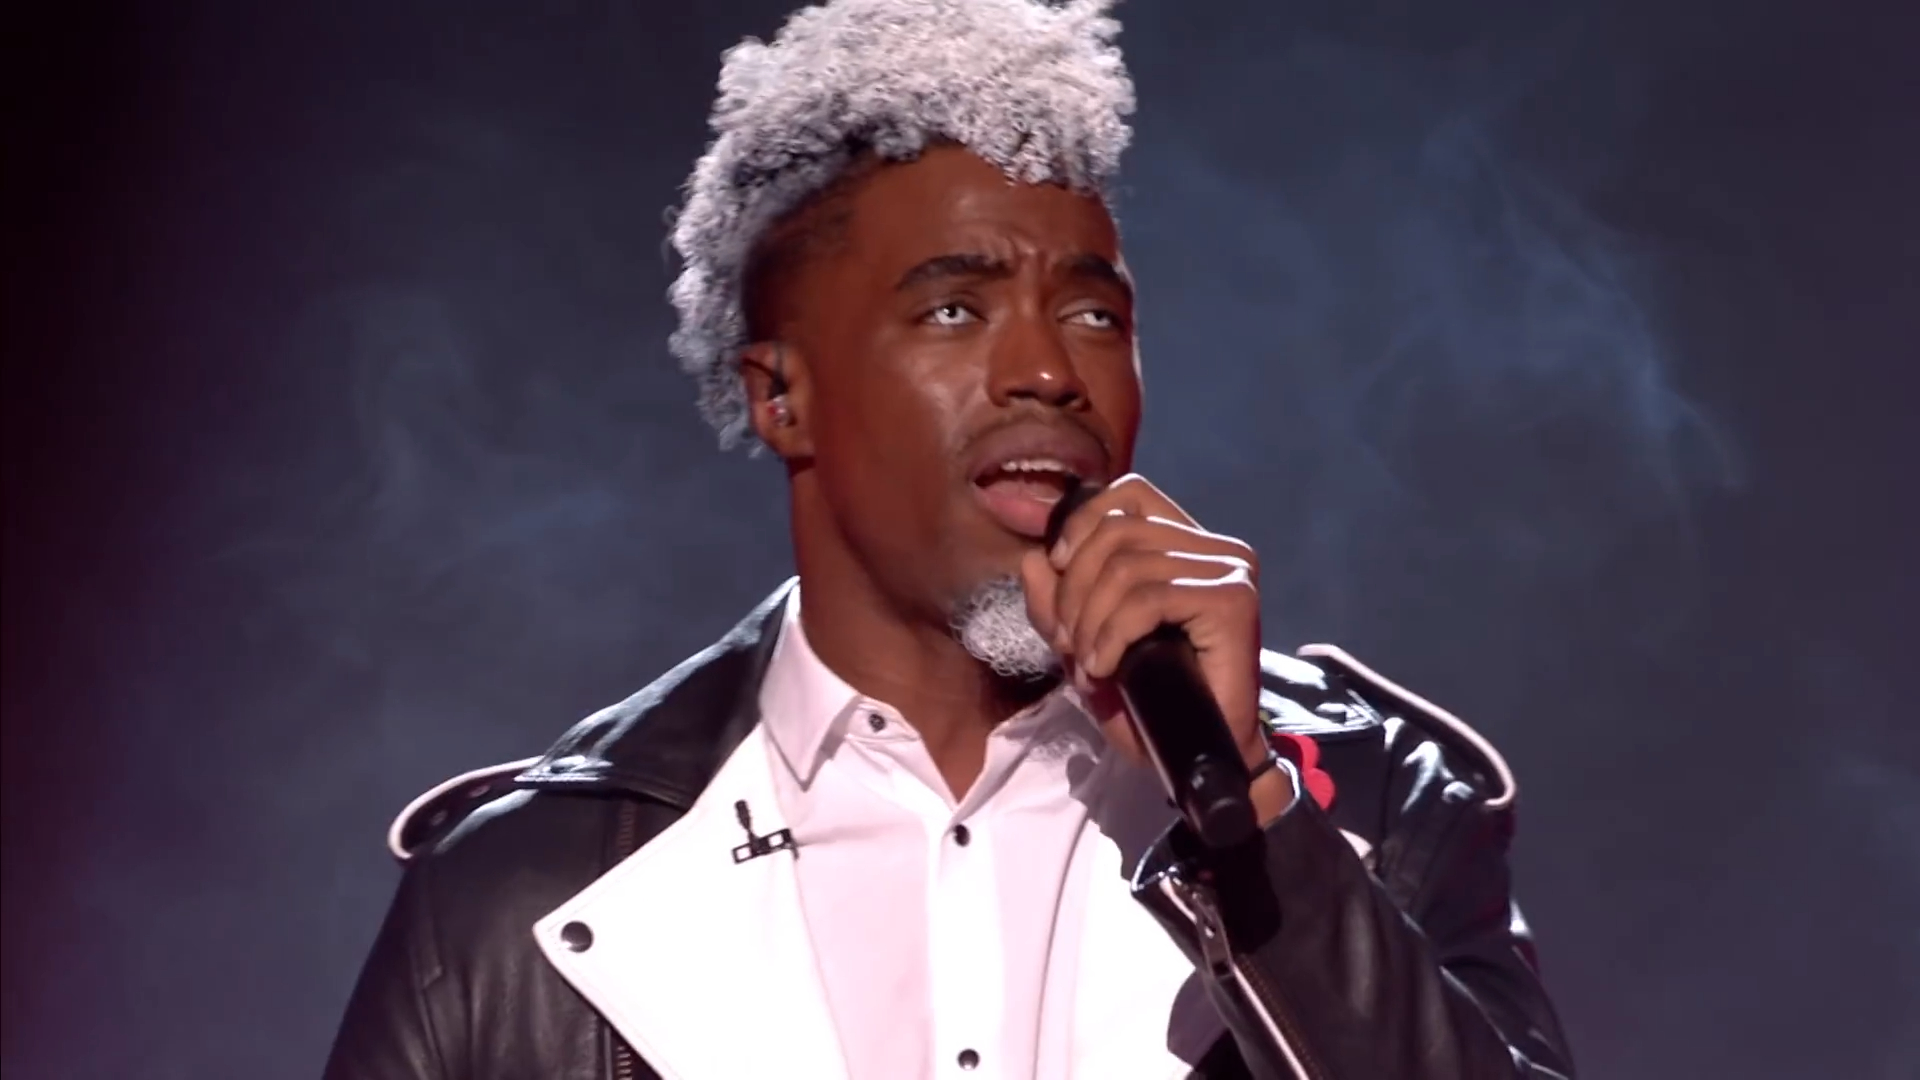 Dalton Harris stuns the X Factor crowd on Fright Night with this spine-tingling rendition of Radiohead’s Creep.